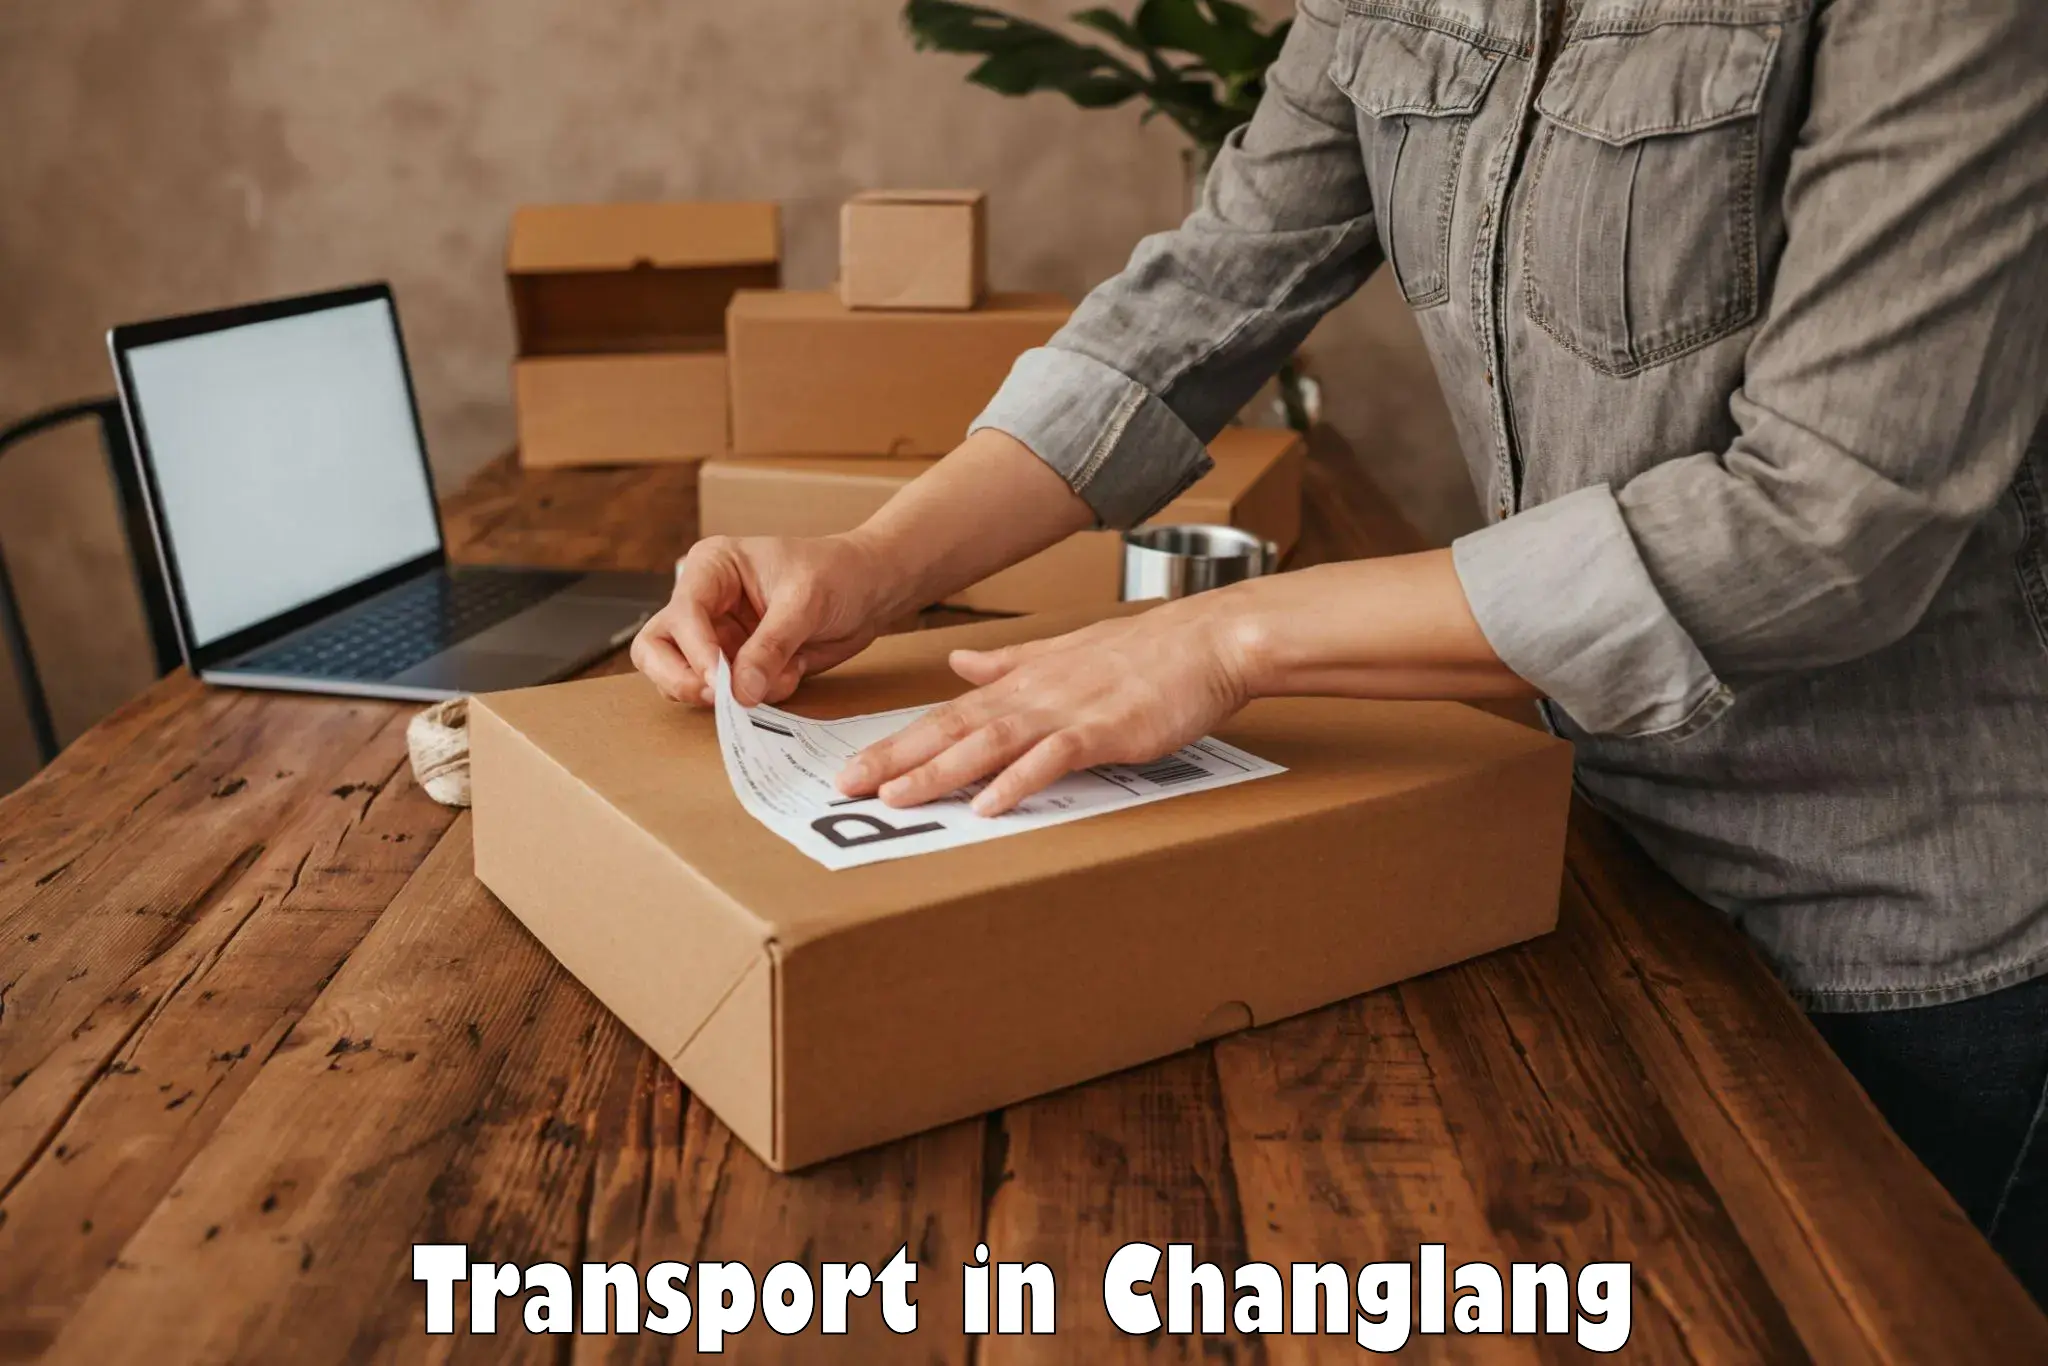 Two wheeler transport services in Changlang